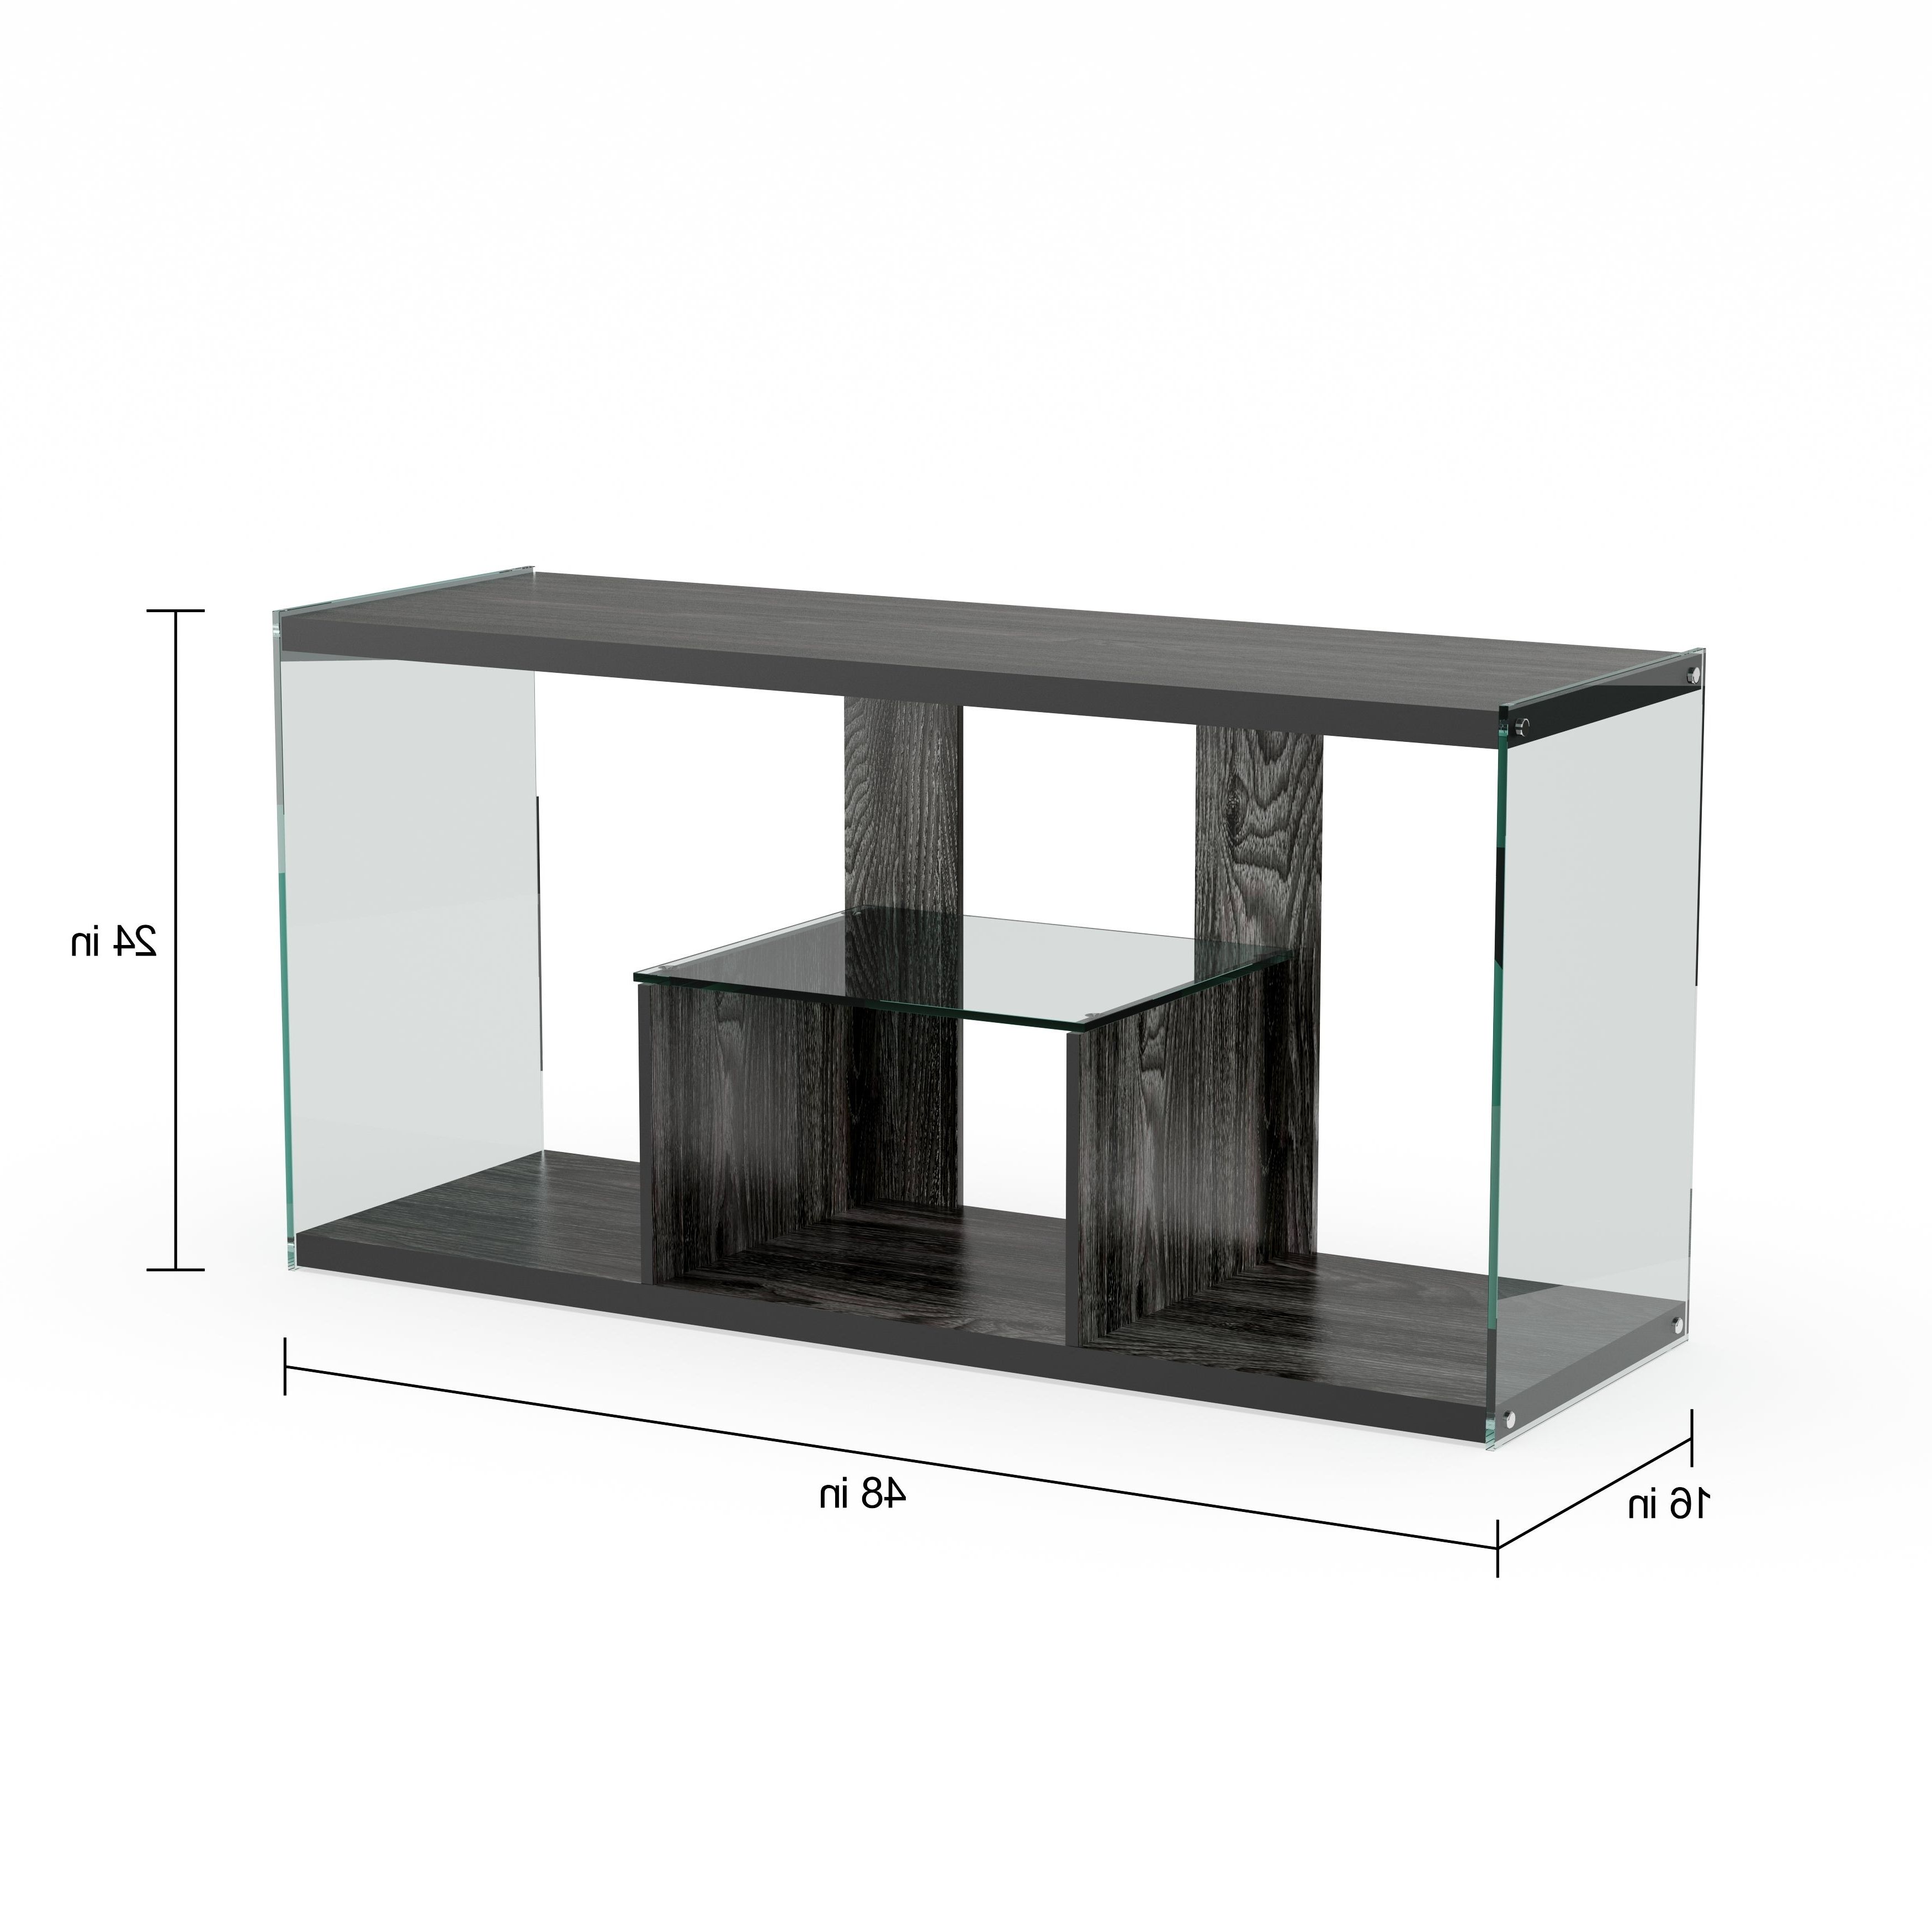 Porch & Den Urqhuart Wood/ Glass Tv Stand Inside Preferred Porch & Den Urqhuart Wood Glass Coffee Tables (View 8 of 20)